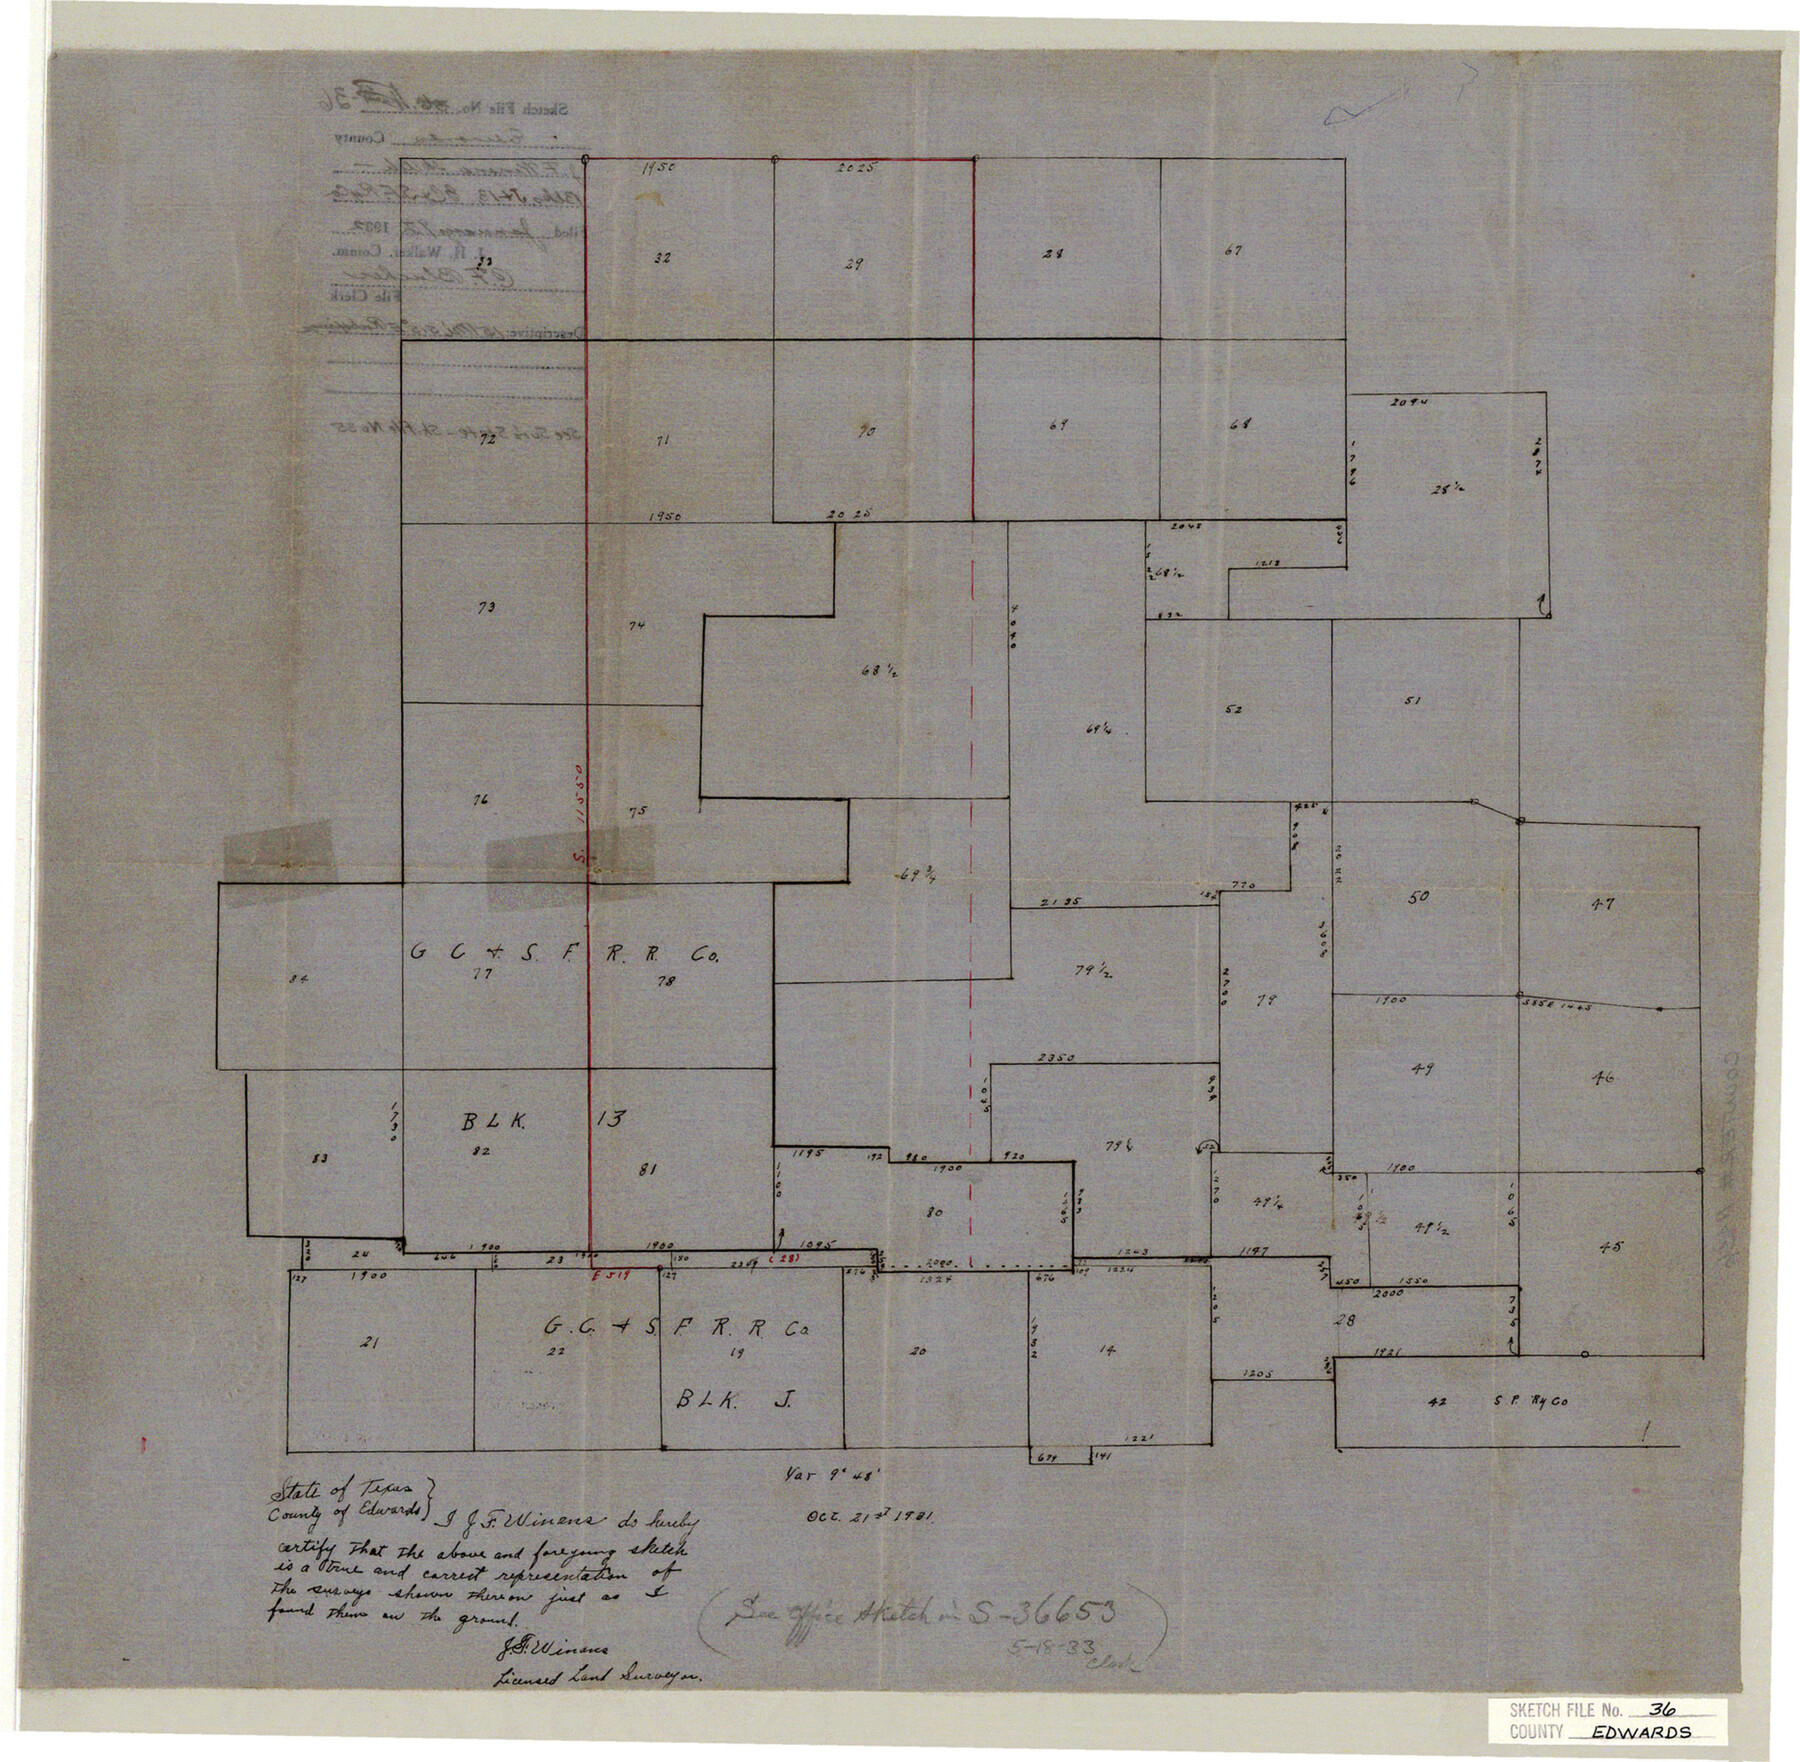 11436, Edwards County Sketch File 36, General Map Collection